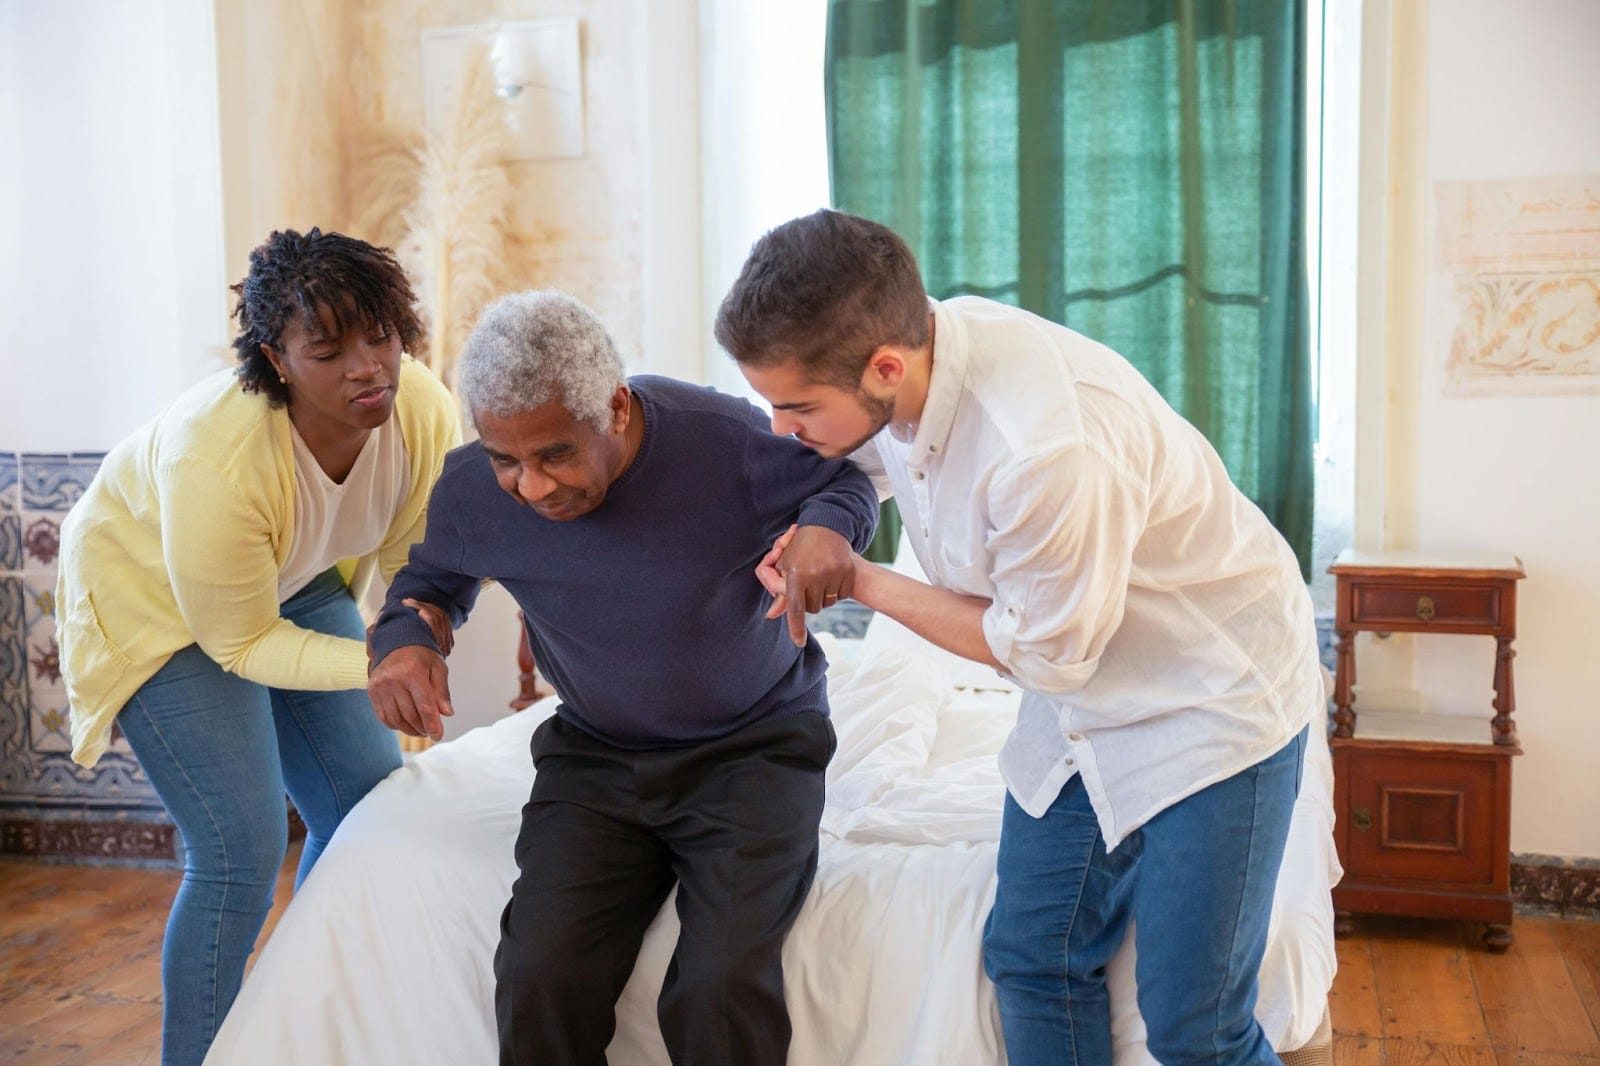 Respite care workers helping an elderly gentleman stand up from his bed